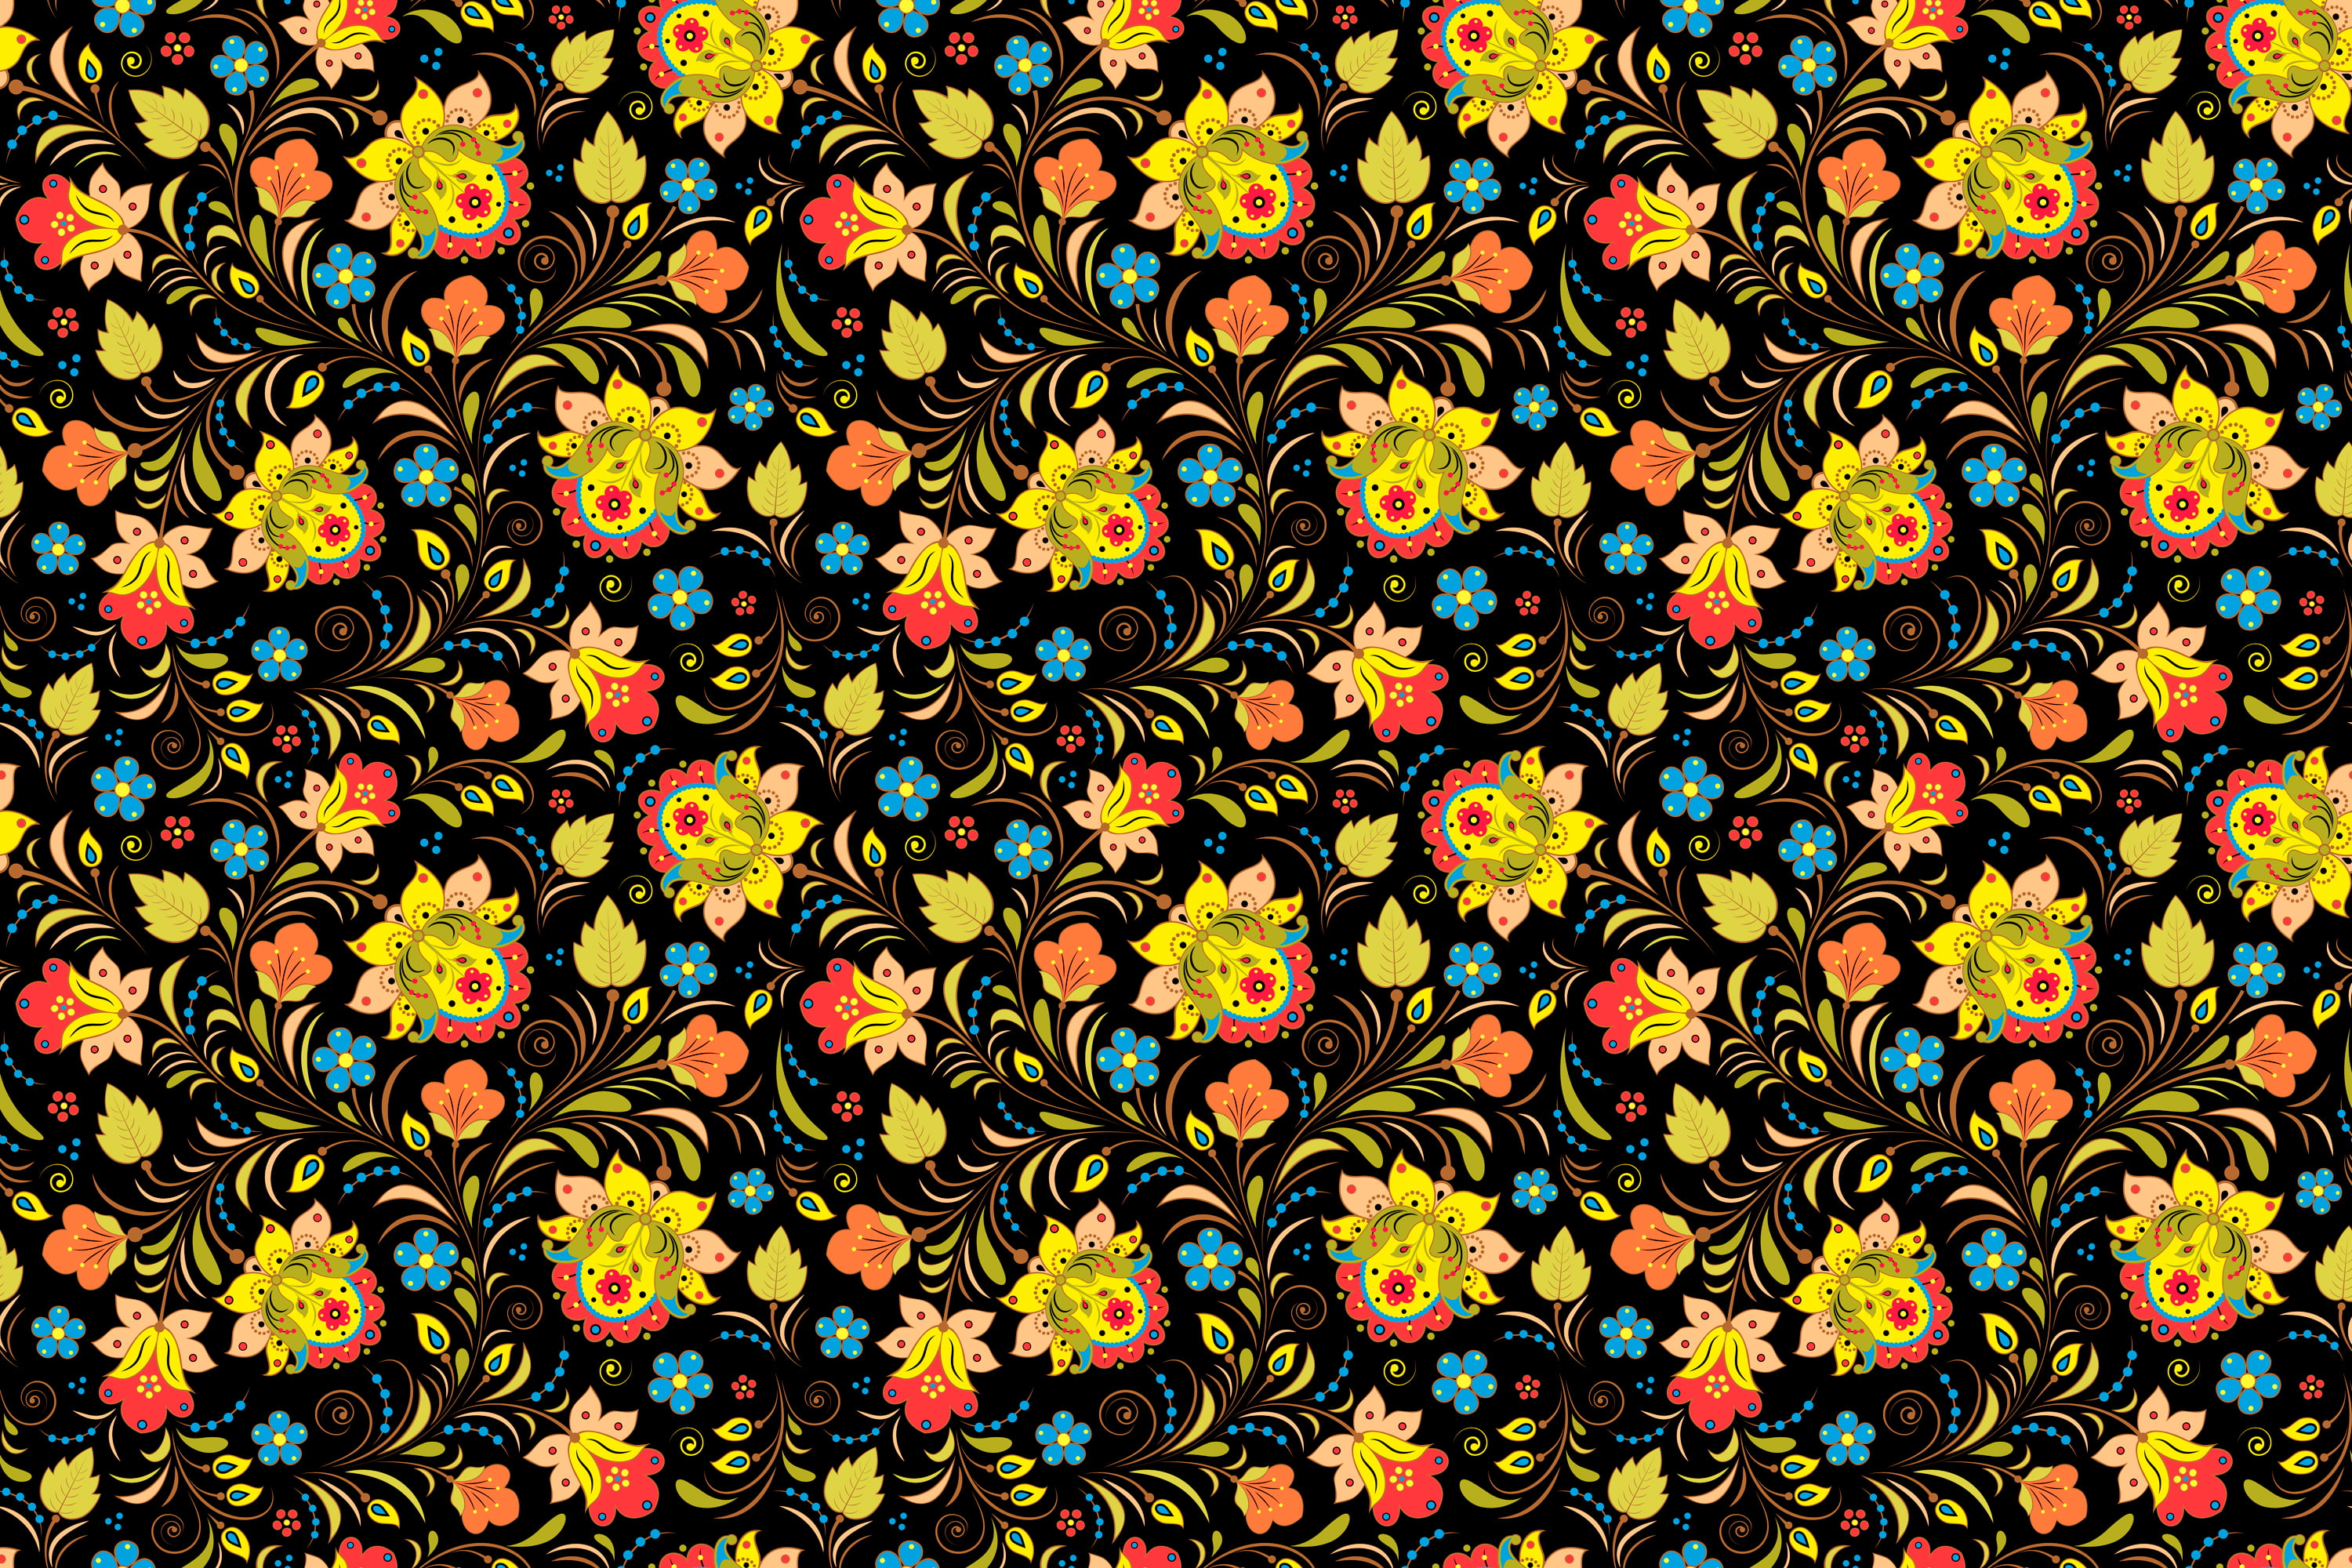 black, yellow, blue, and black floral wallpaper